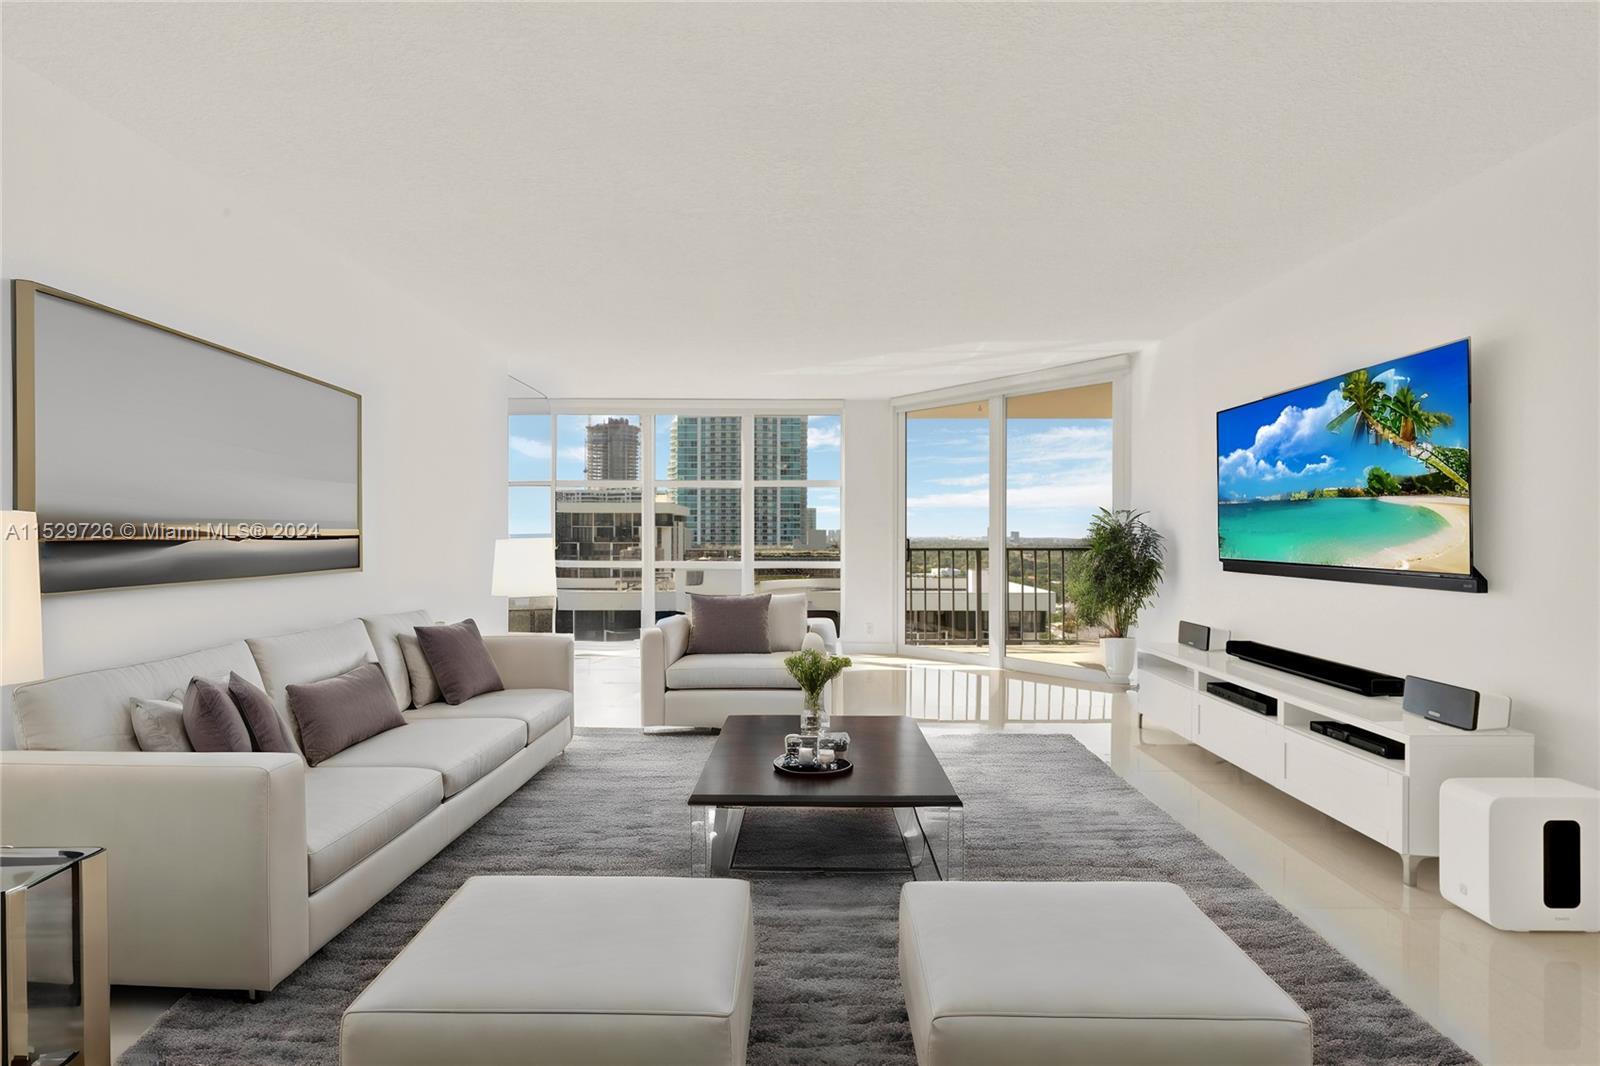 Take a look INSIDE this stunning unit at Brickell Place! With 1 bedroom and 2 bathrooms, this reside